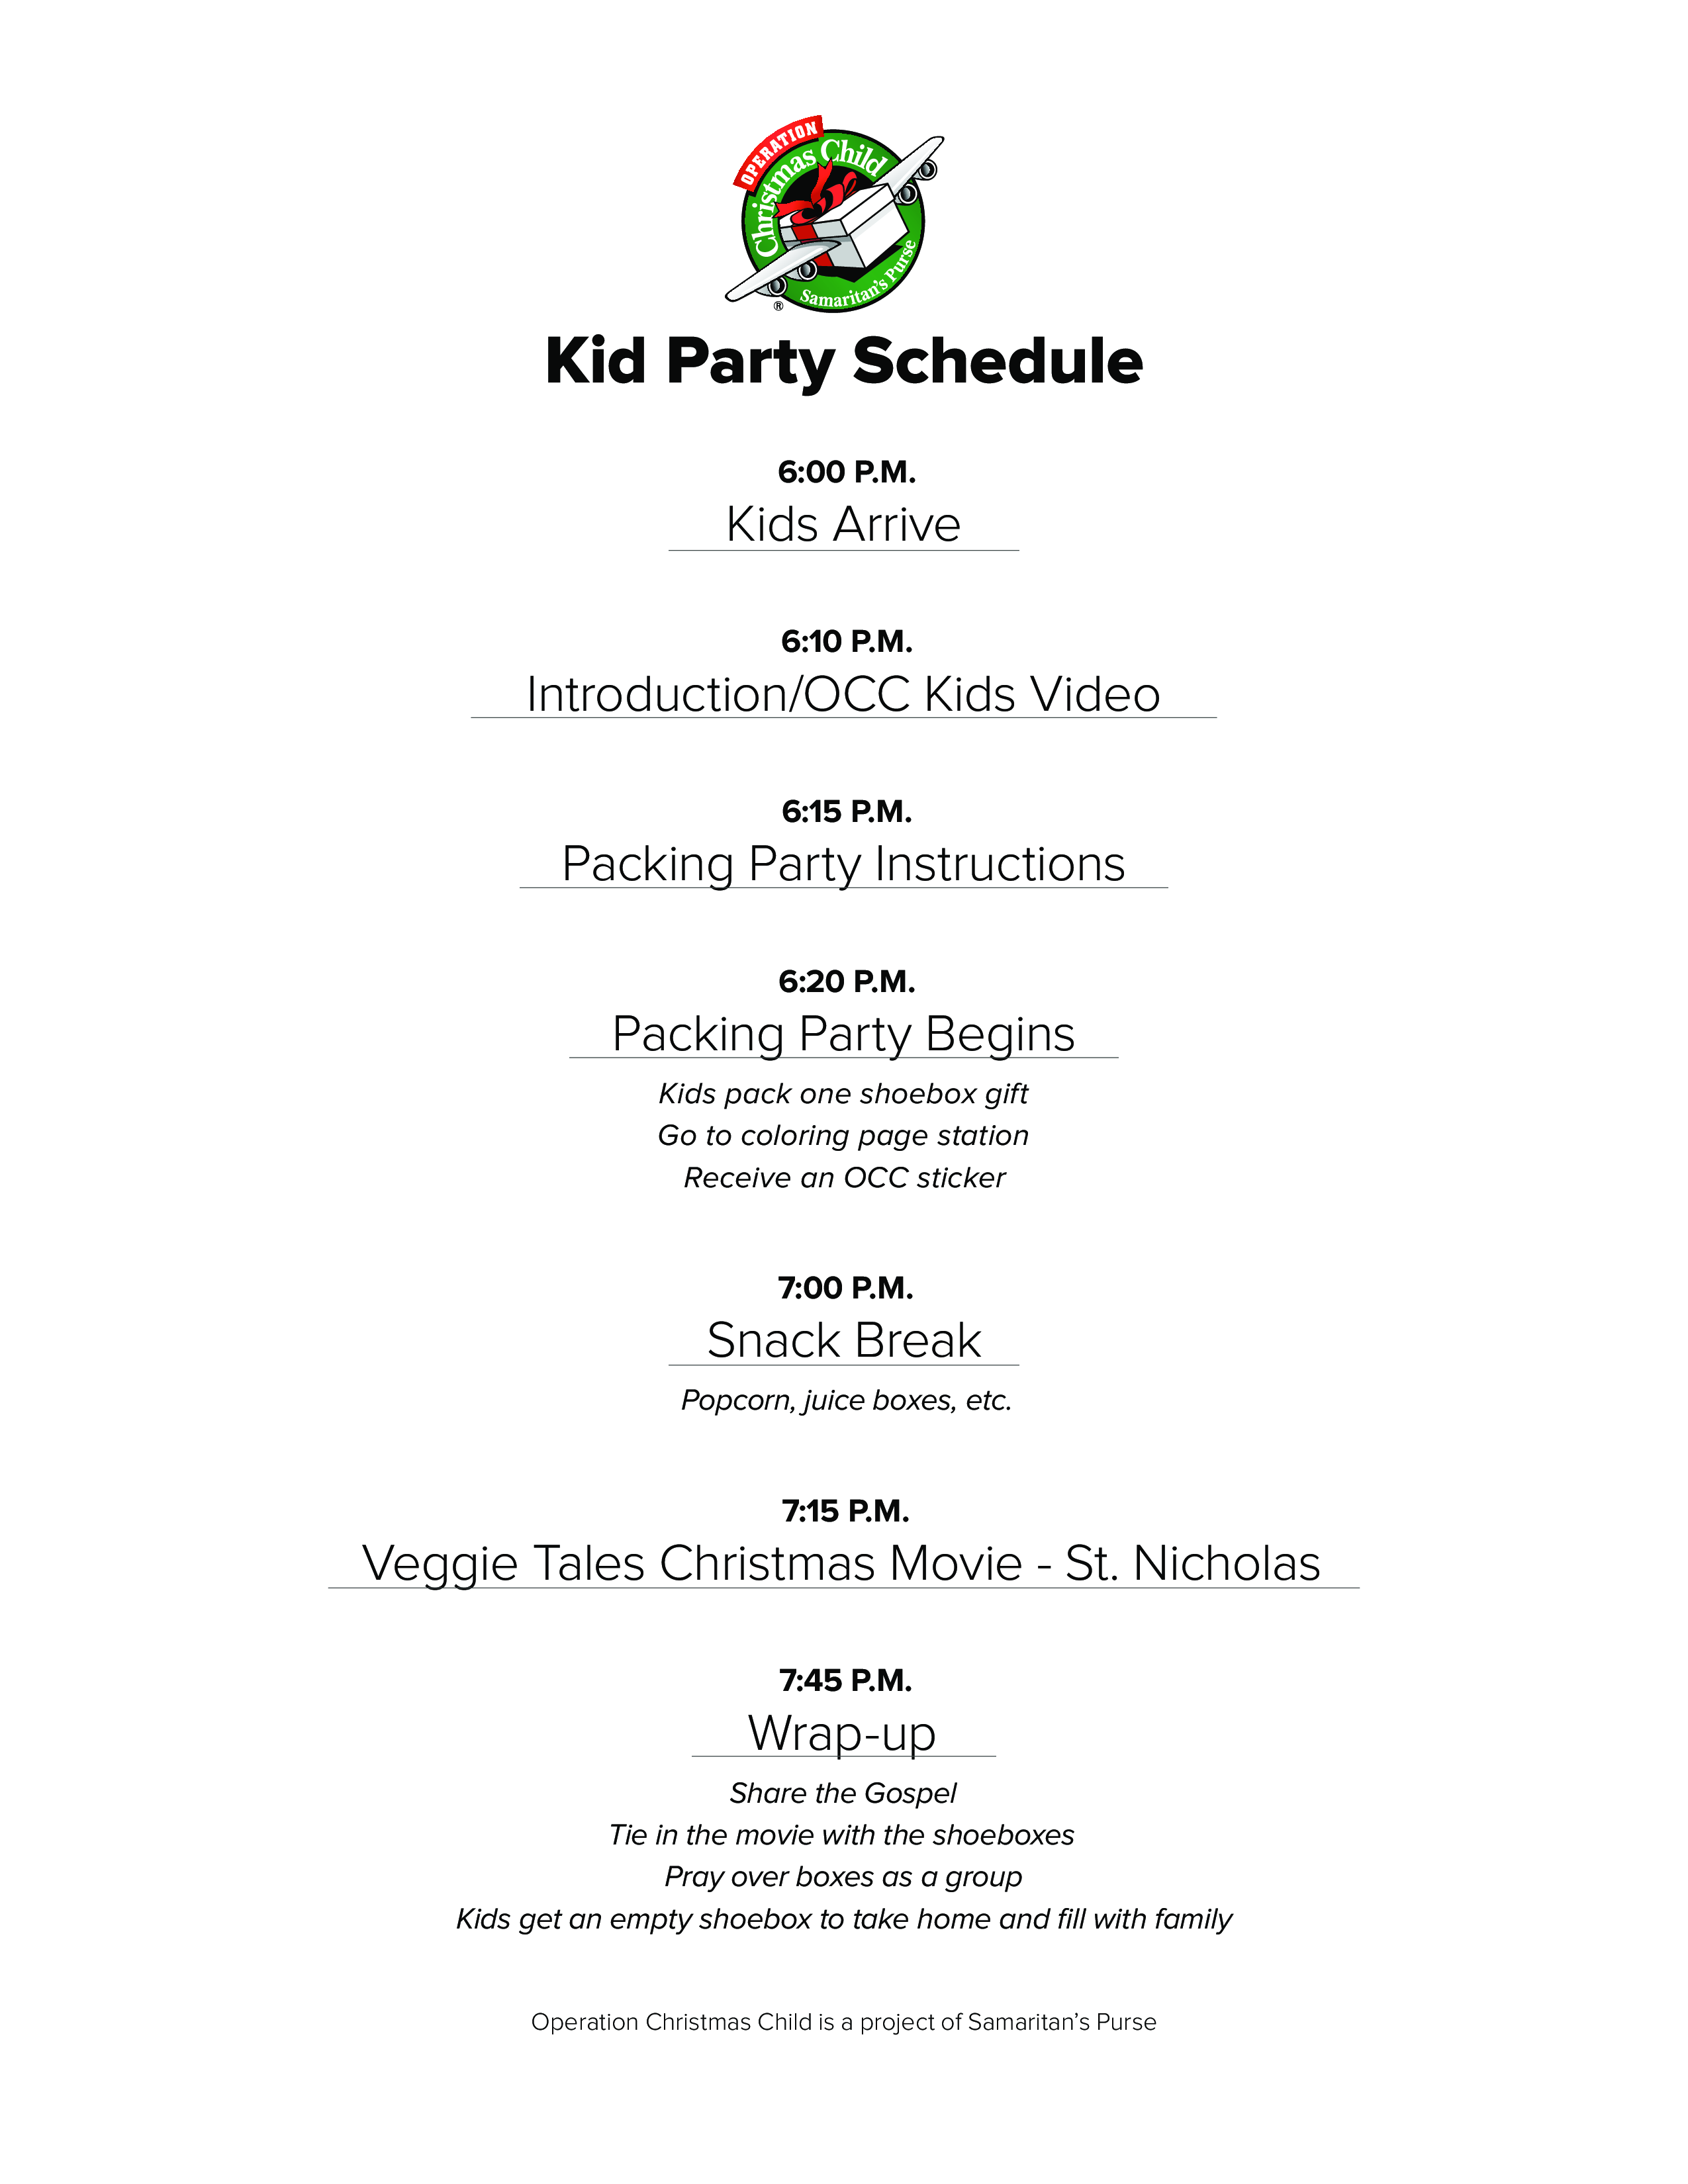 Kid's Party Schedule main image